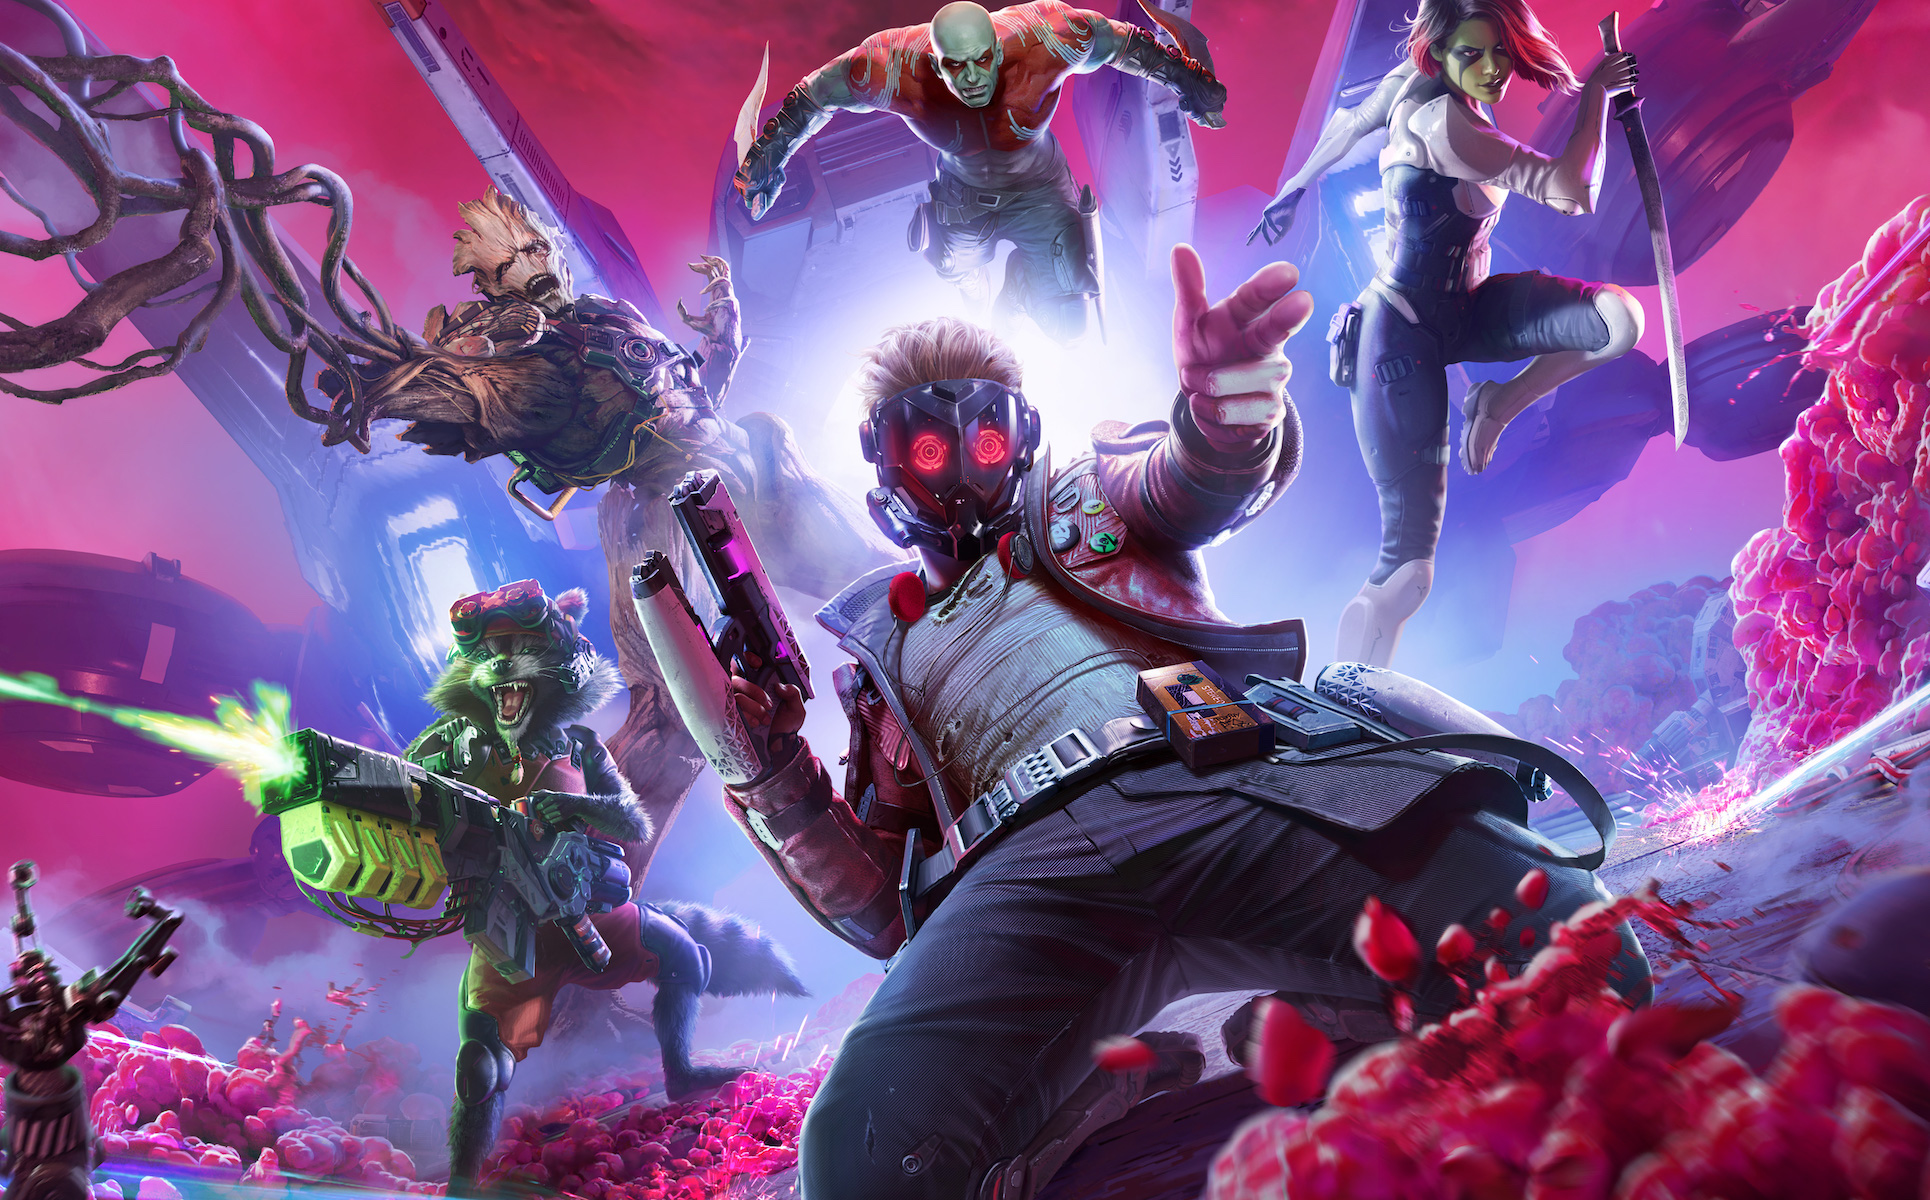 Artwork of the Guardians of the Galaxy game by Square Enix